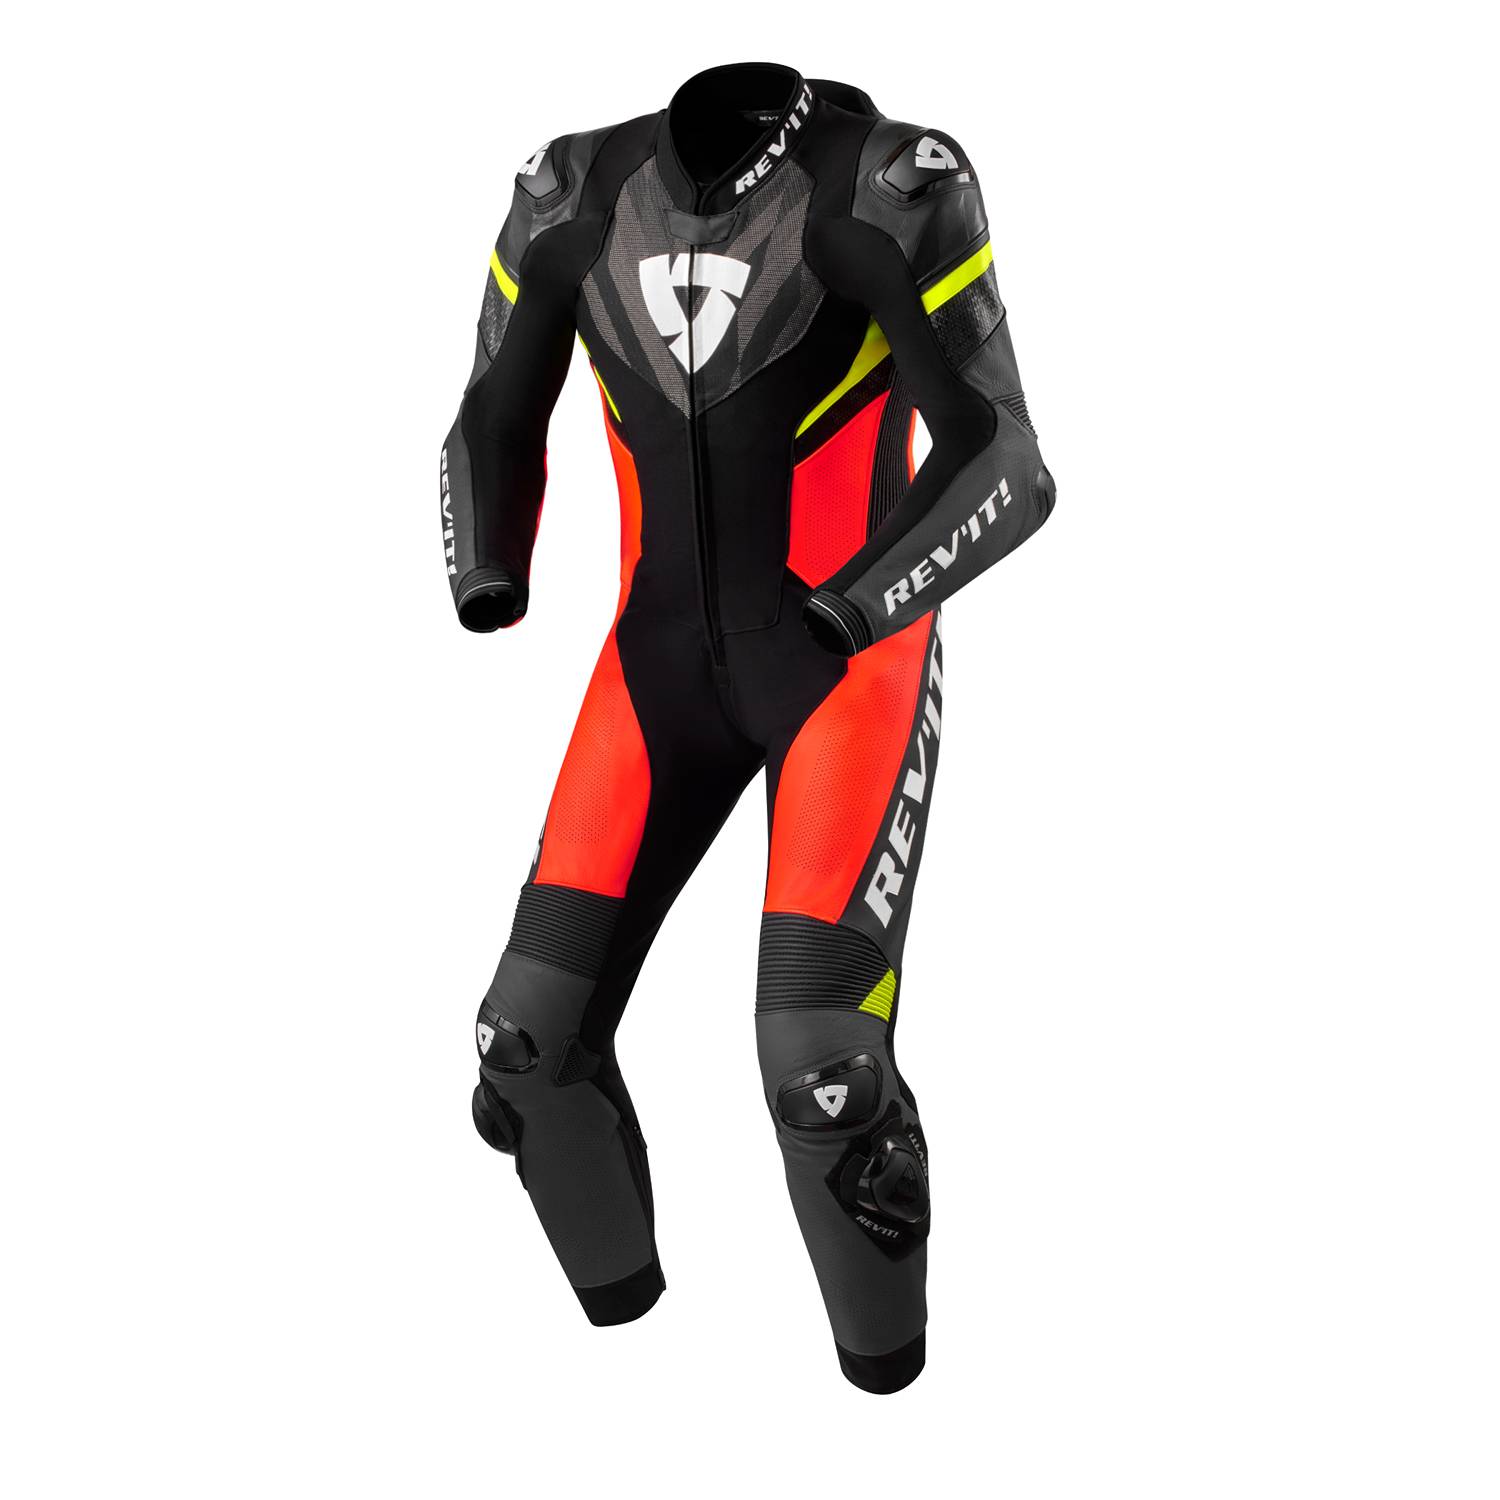 Image of REV'IT! Hyperspeed 2 One Piece Suit Black Neon Red Size 52 ID 8700001359801